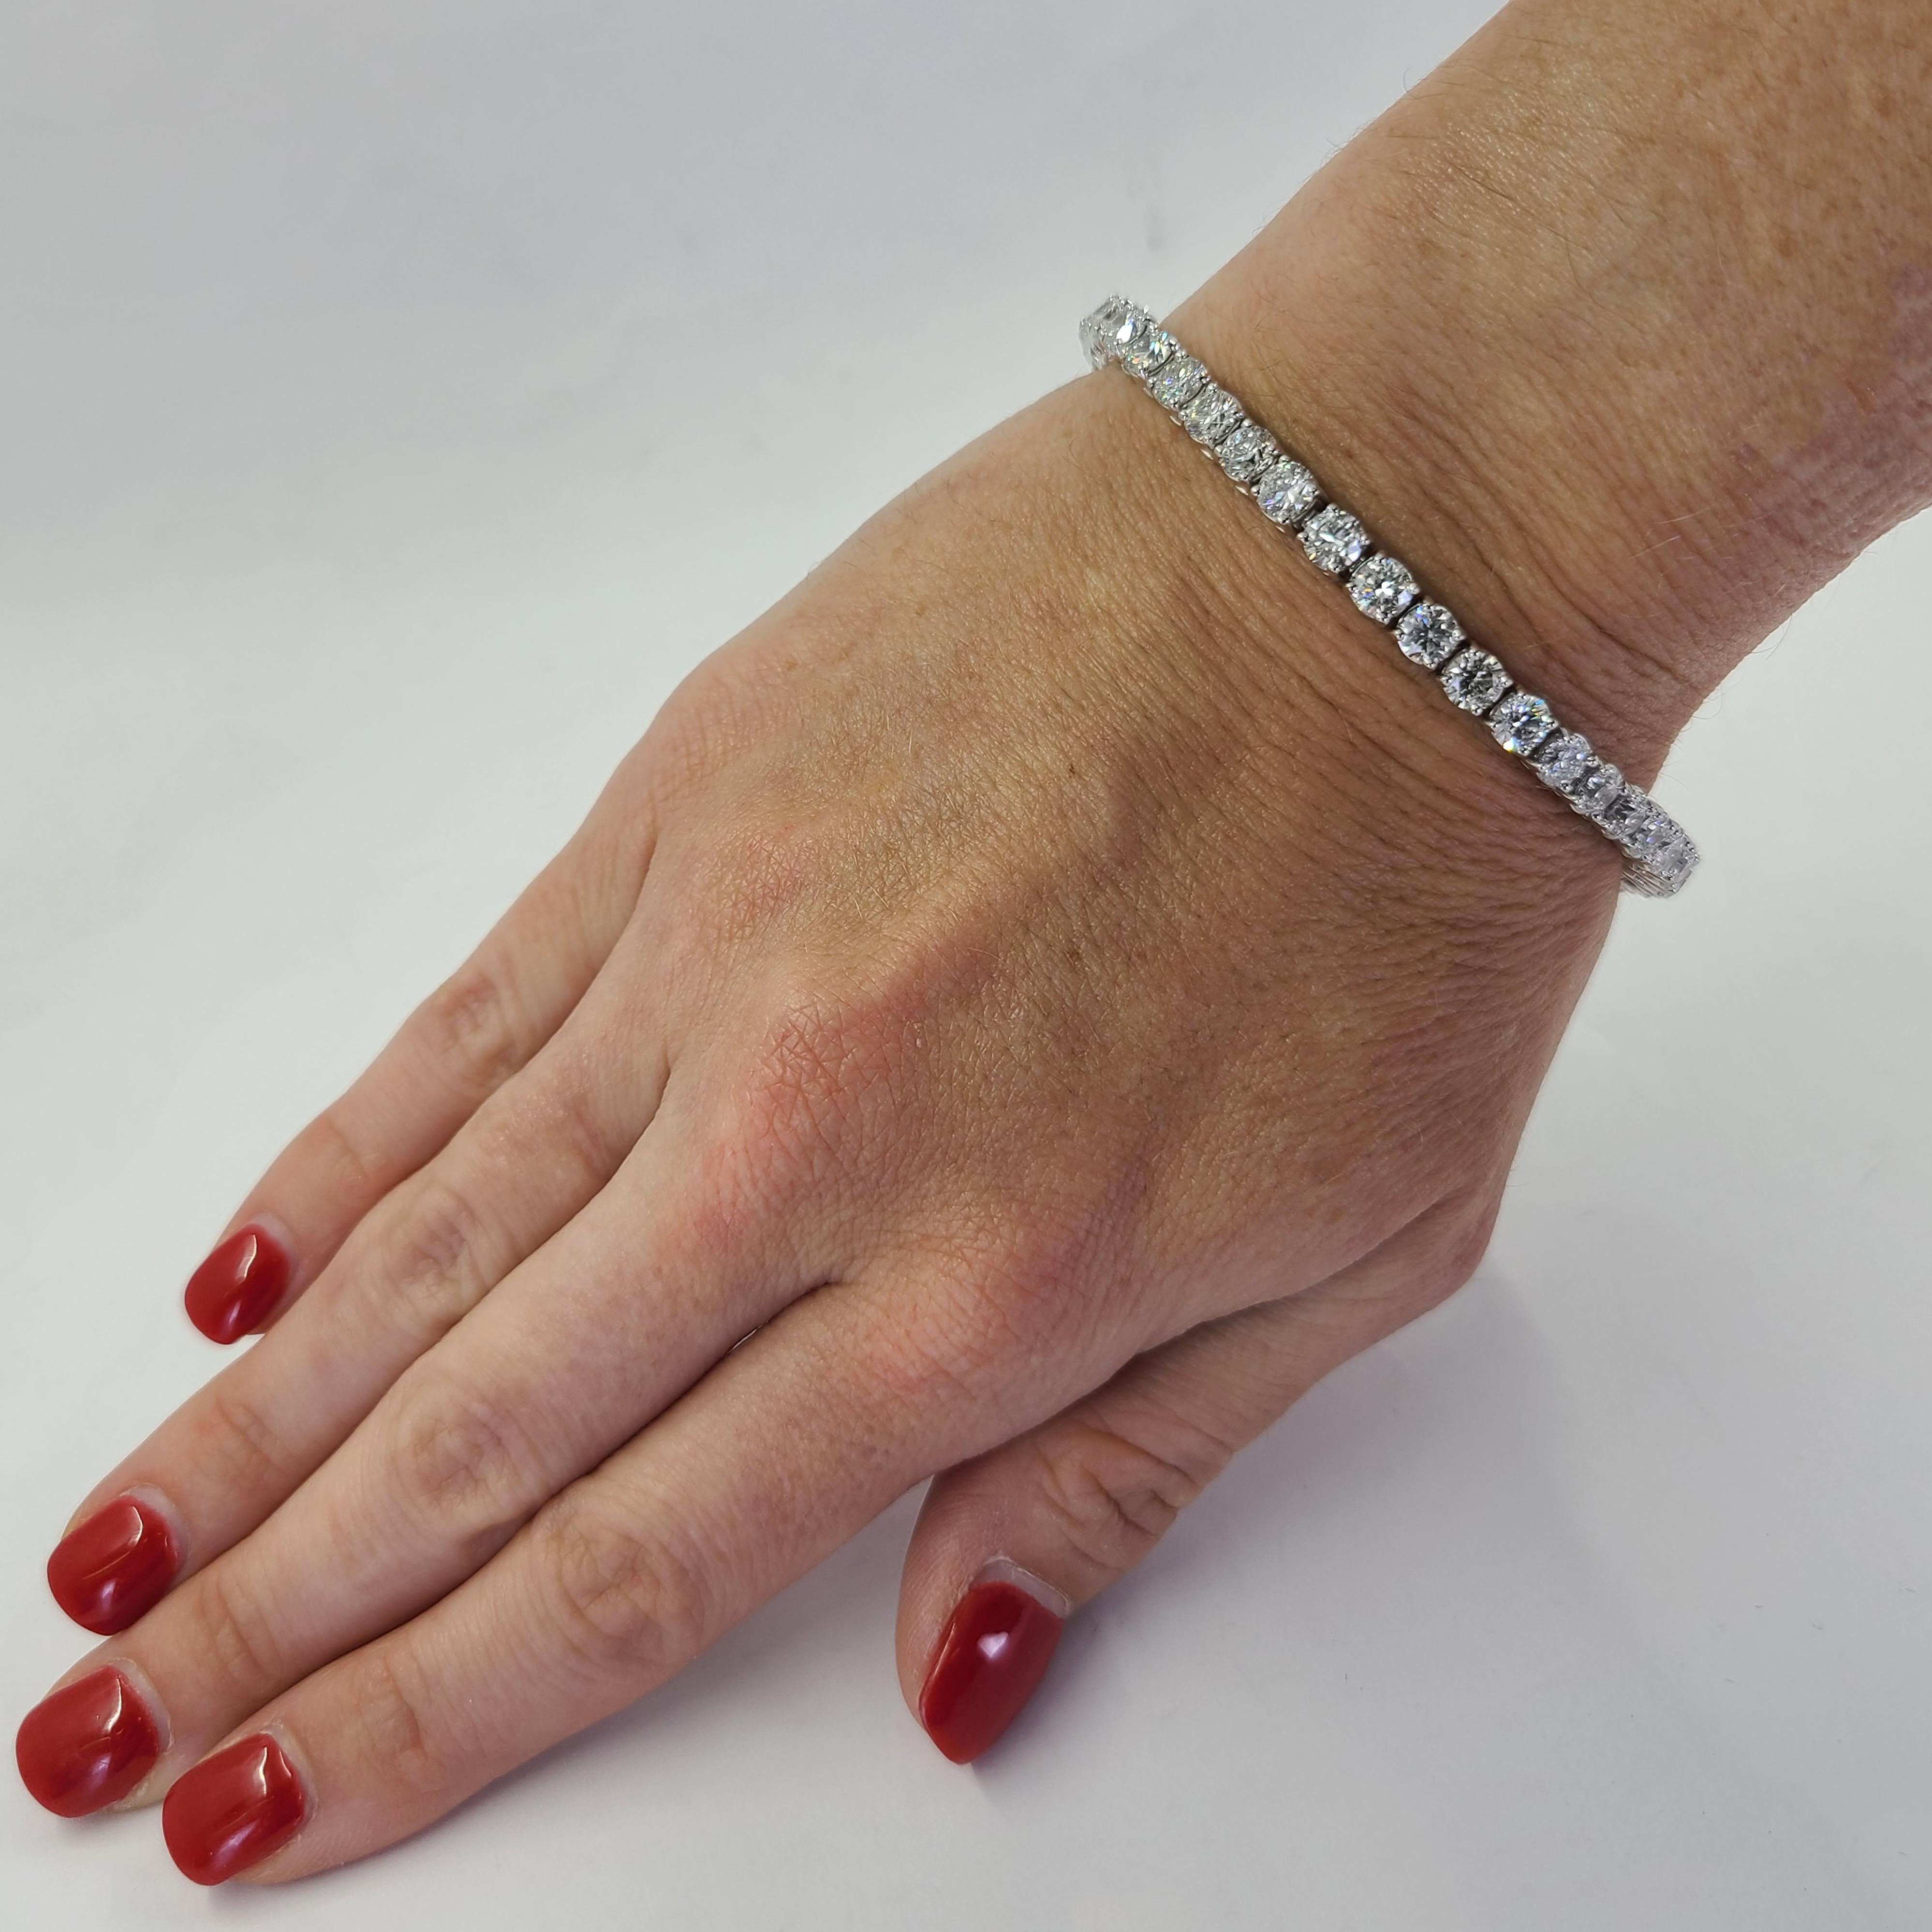 14 Karat White Gold Tennis Bracelet Featuring 39 Round Brilliant Cut Diamonds of SI2/I1 Clarity & G/H Color Totaling 12.66 Carats. 7 Inch Length with Hidden Box Clasp & Safety Latch. Finished Weight Is 22.6 Grams. Can Be Shortened Upon Request To